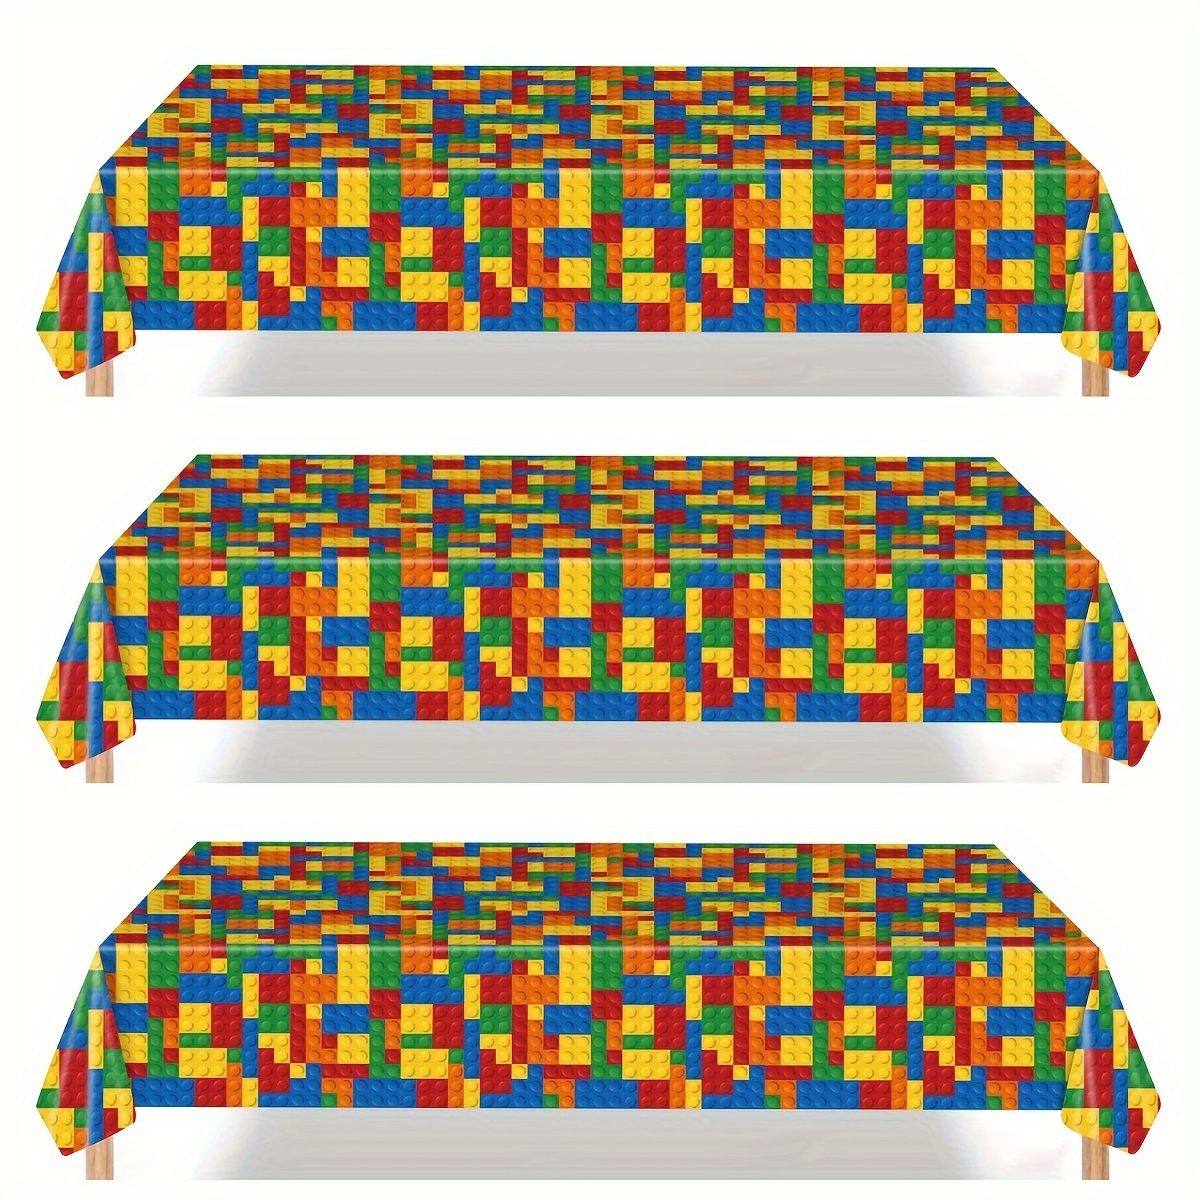 

Block Building Bricks Party Tablecloth - 54"x108" - Colorful Table Cover For Game Enthusiasts Birthday Supplies, Construction Theme Parties, Plastic Disposable Tableware